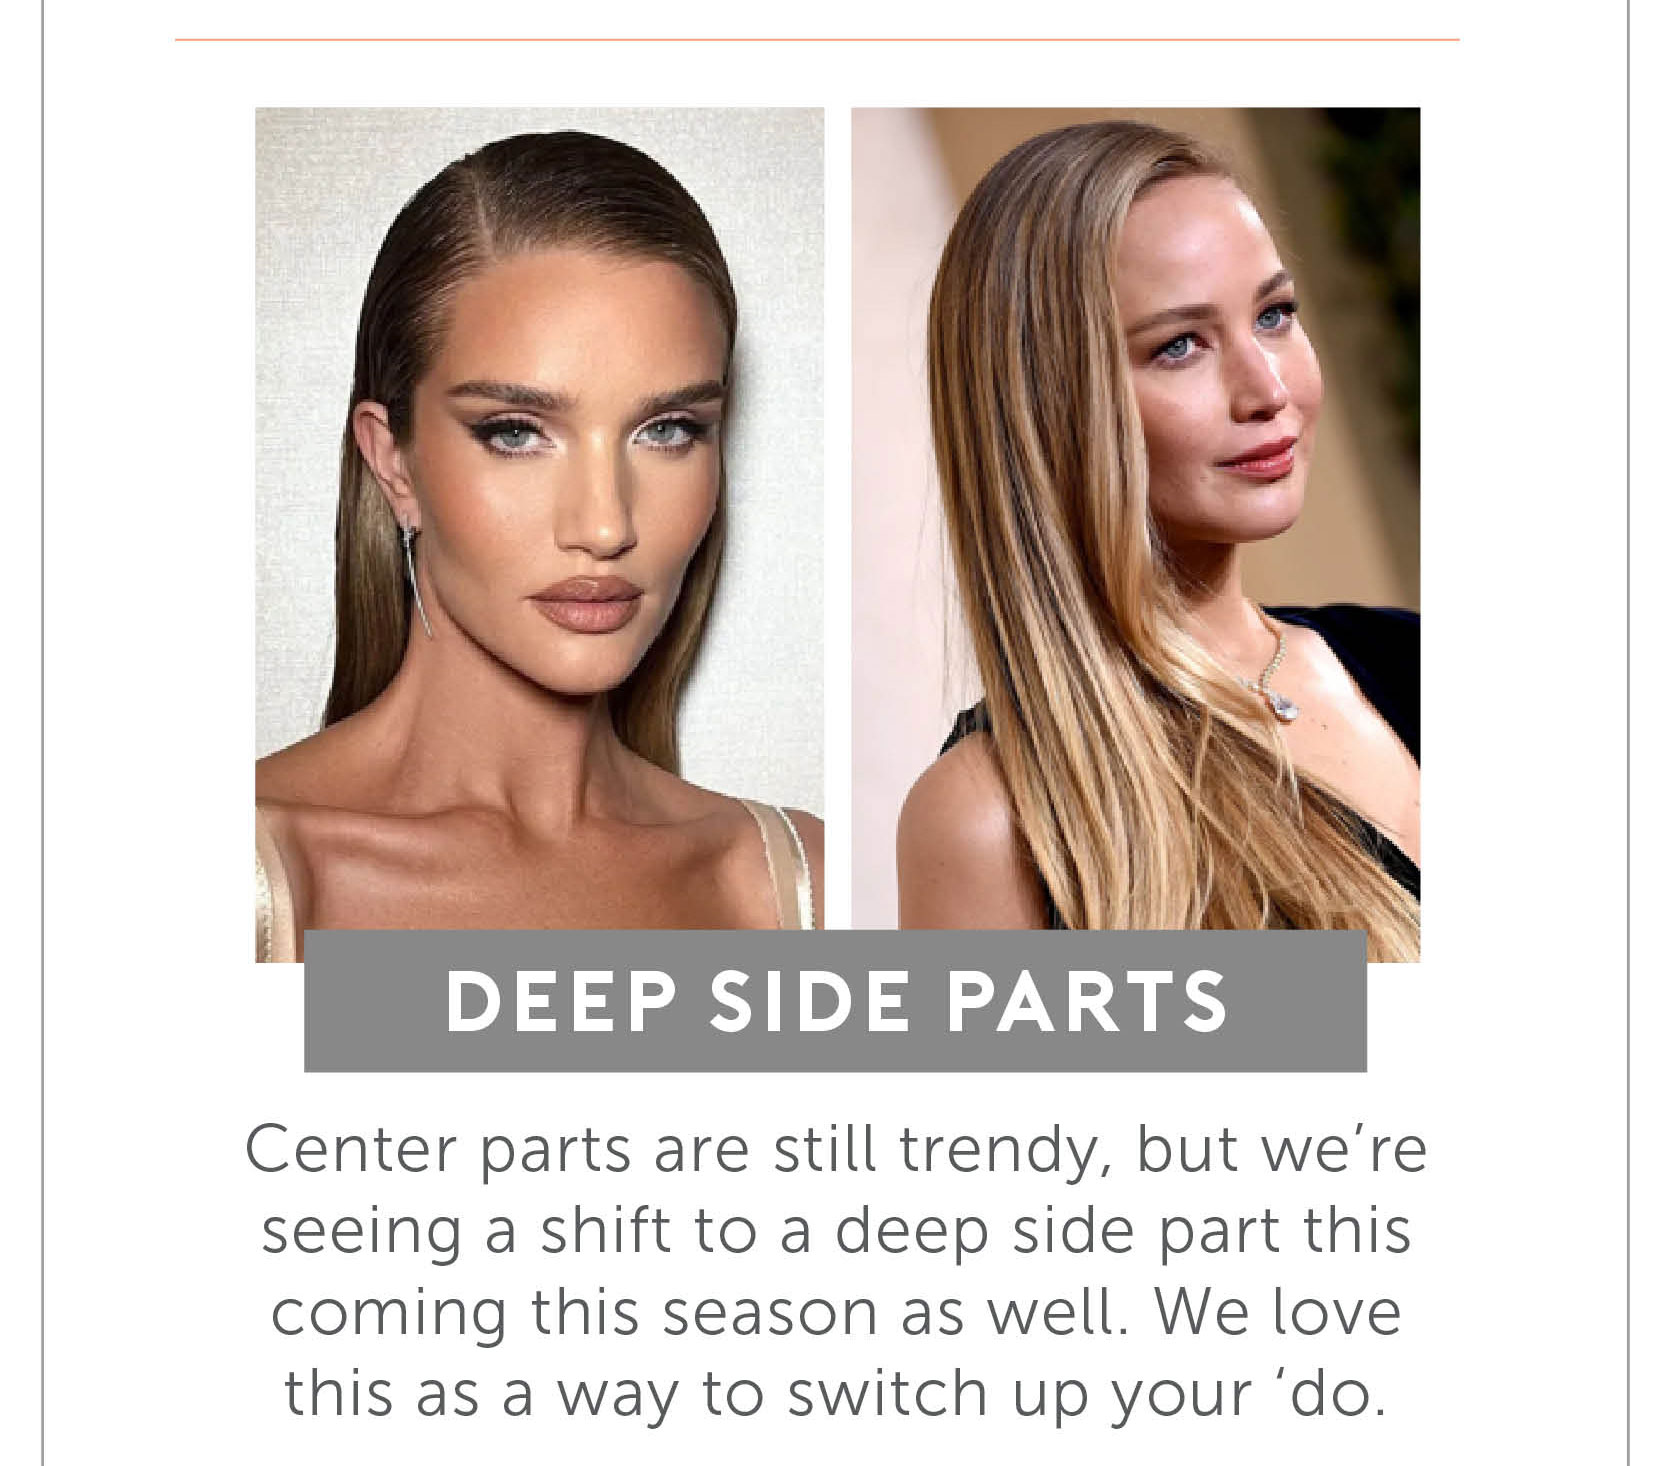 Deep Side Parts - Center parts are still trendy, but we’re seeing a shift to a deep side part this coming this season as well. We love this as a way to switch up your ‘do.